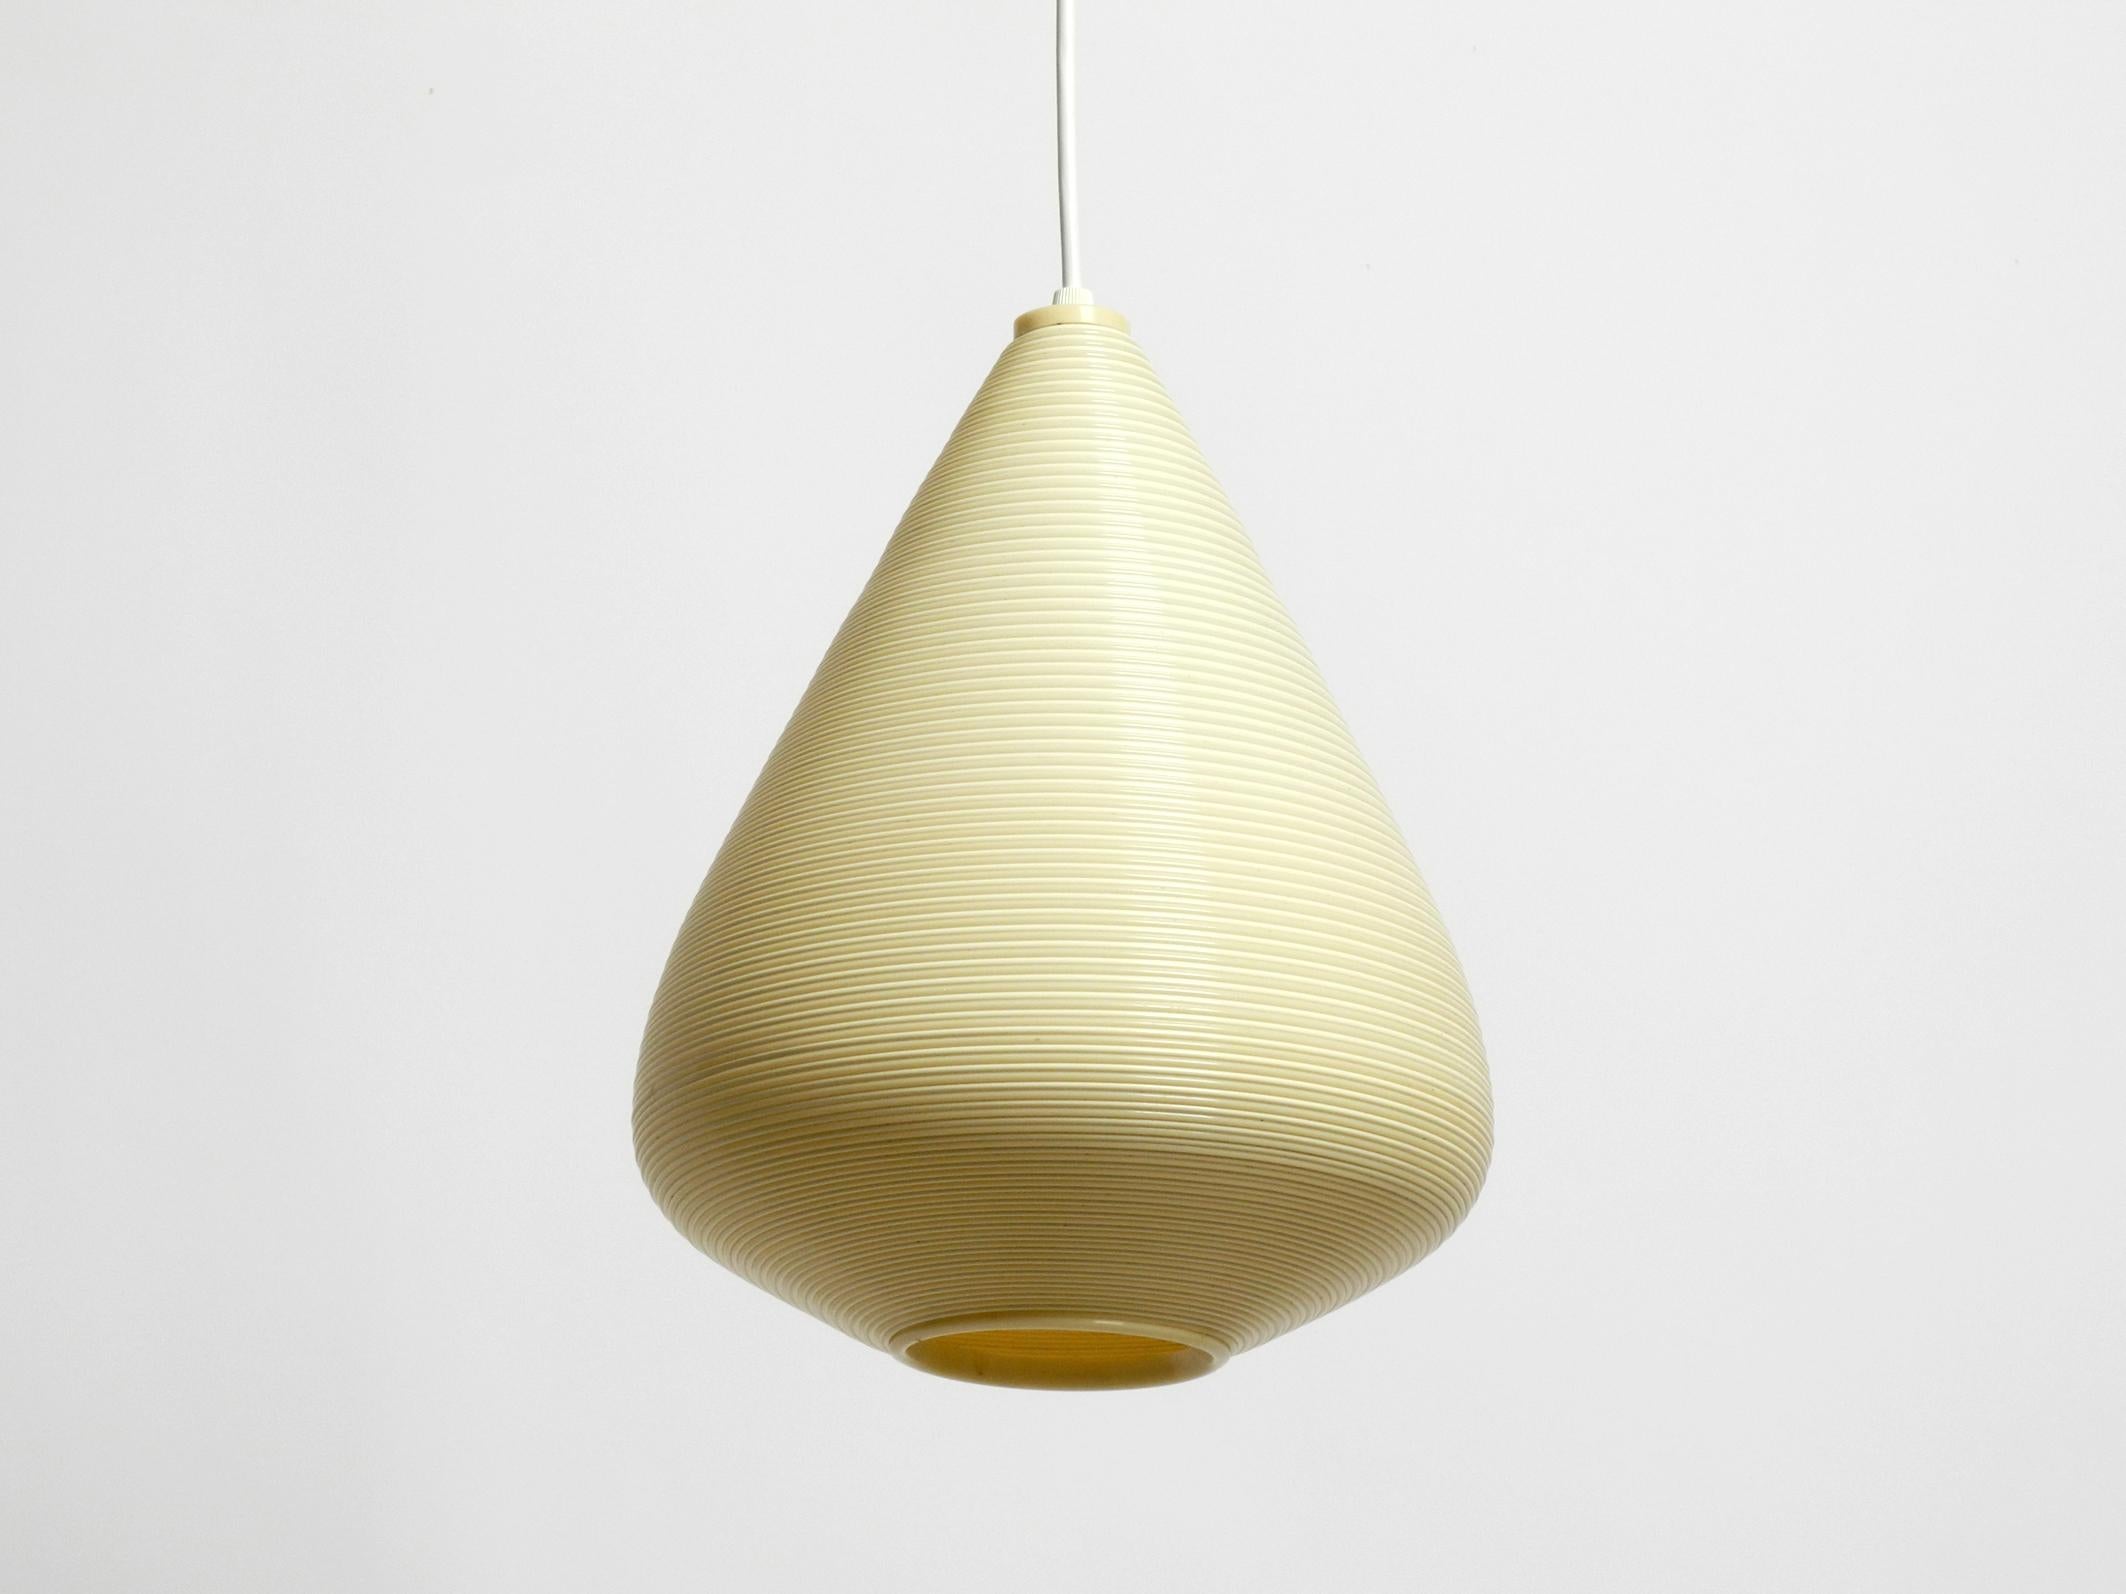 Beautiful original large 1960s beige Heifetz Rotaflex pendant lamp in a teardrop shape.
Great glare-free light for all living spaces.
Very good original condition with no damage.
100% original condition and fully functional. Without canopy.
One E27